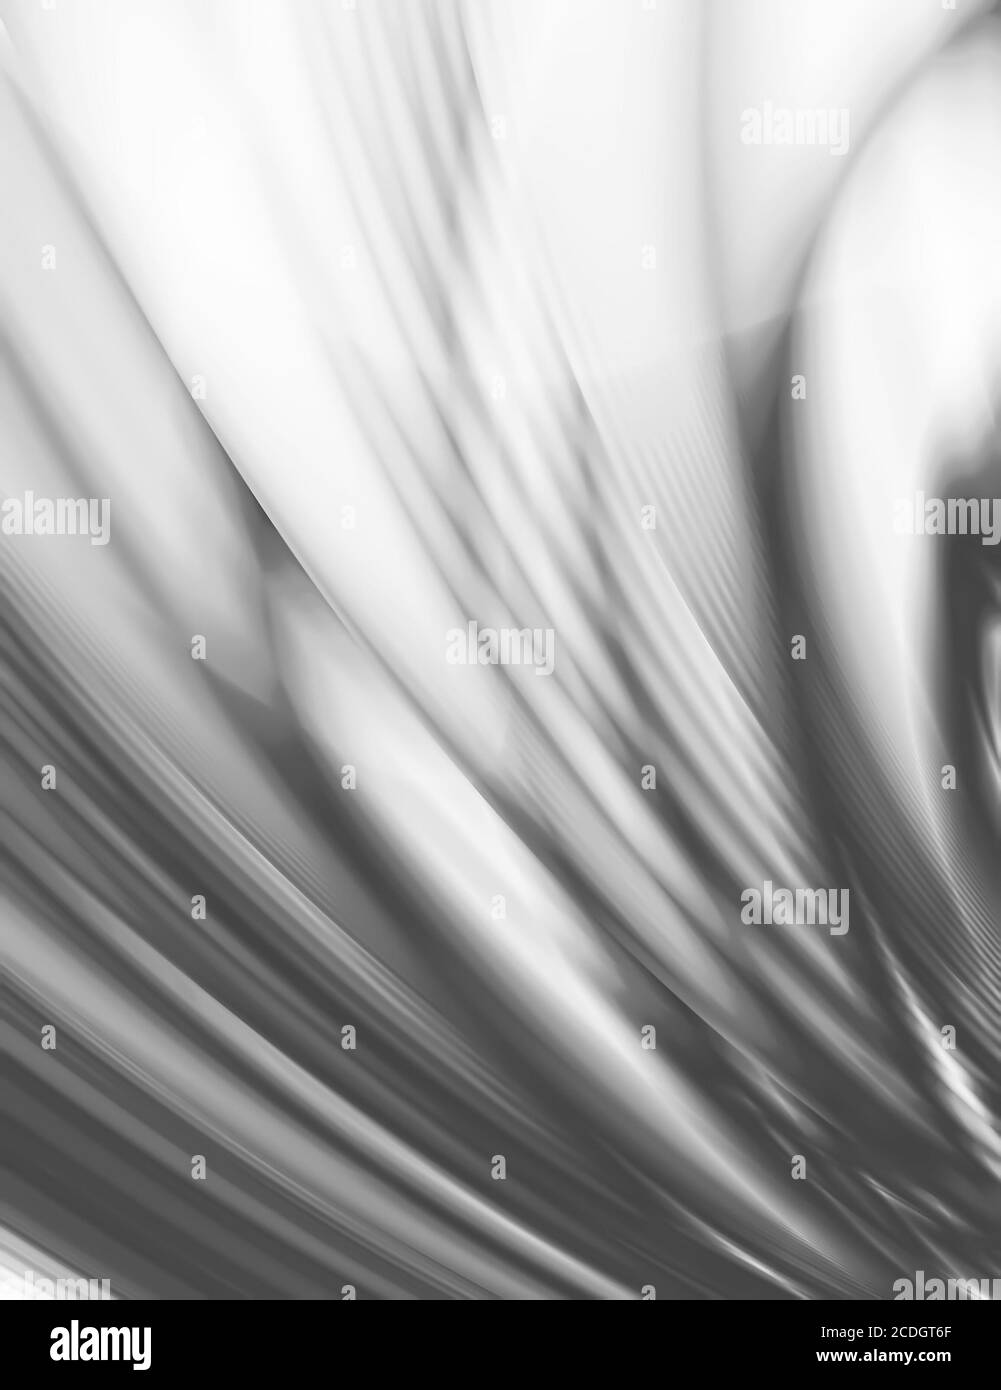 Abstract background from white-grey smooth waves Stock Photo